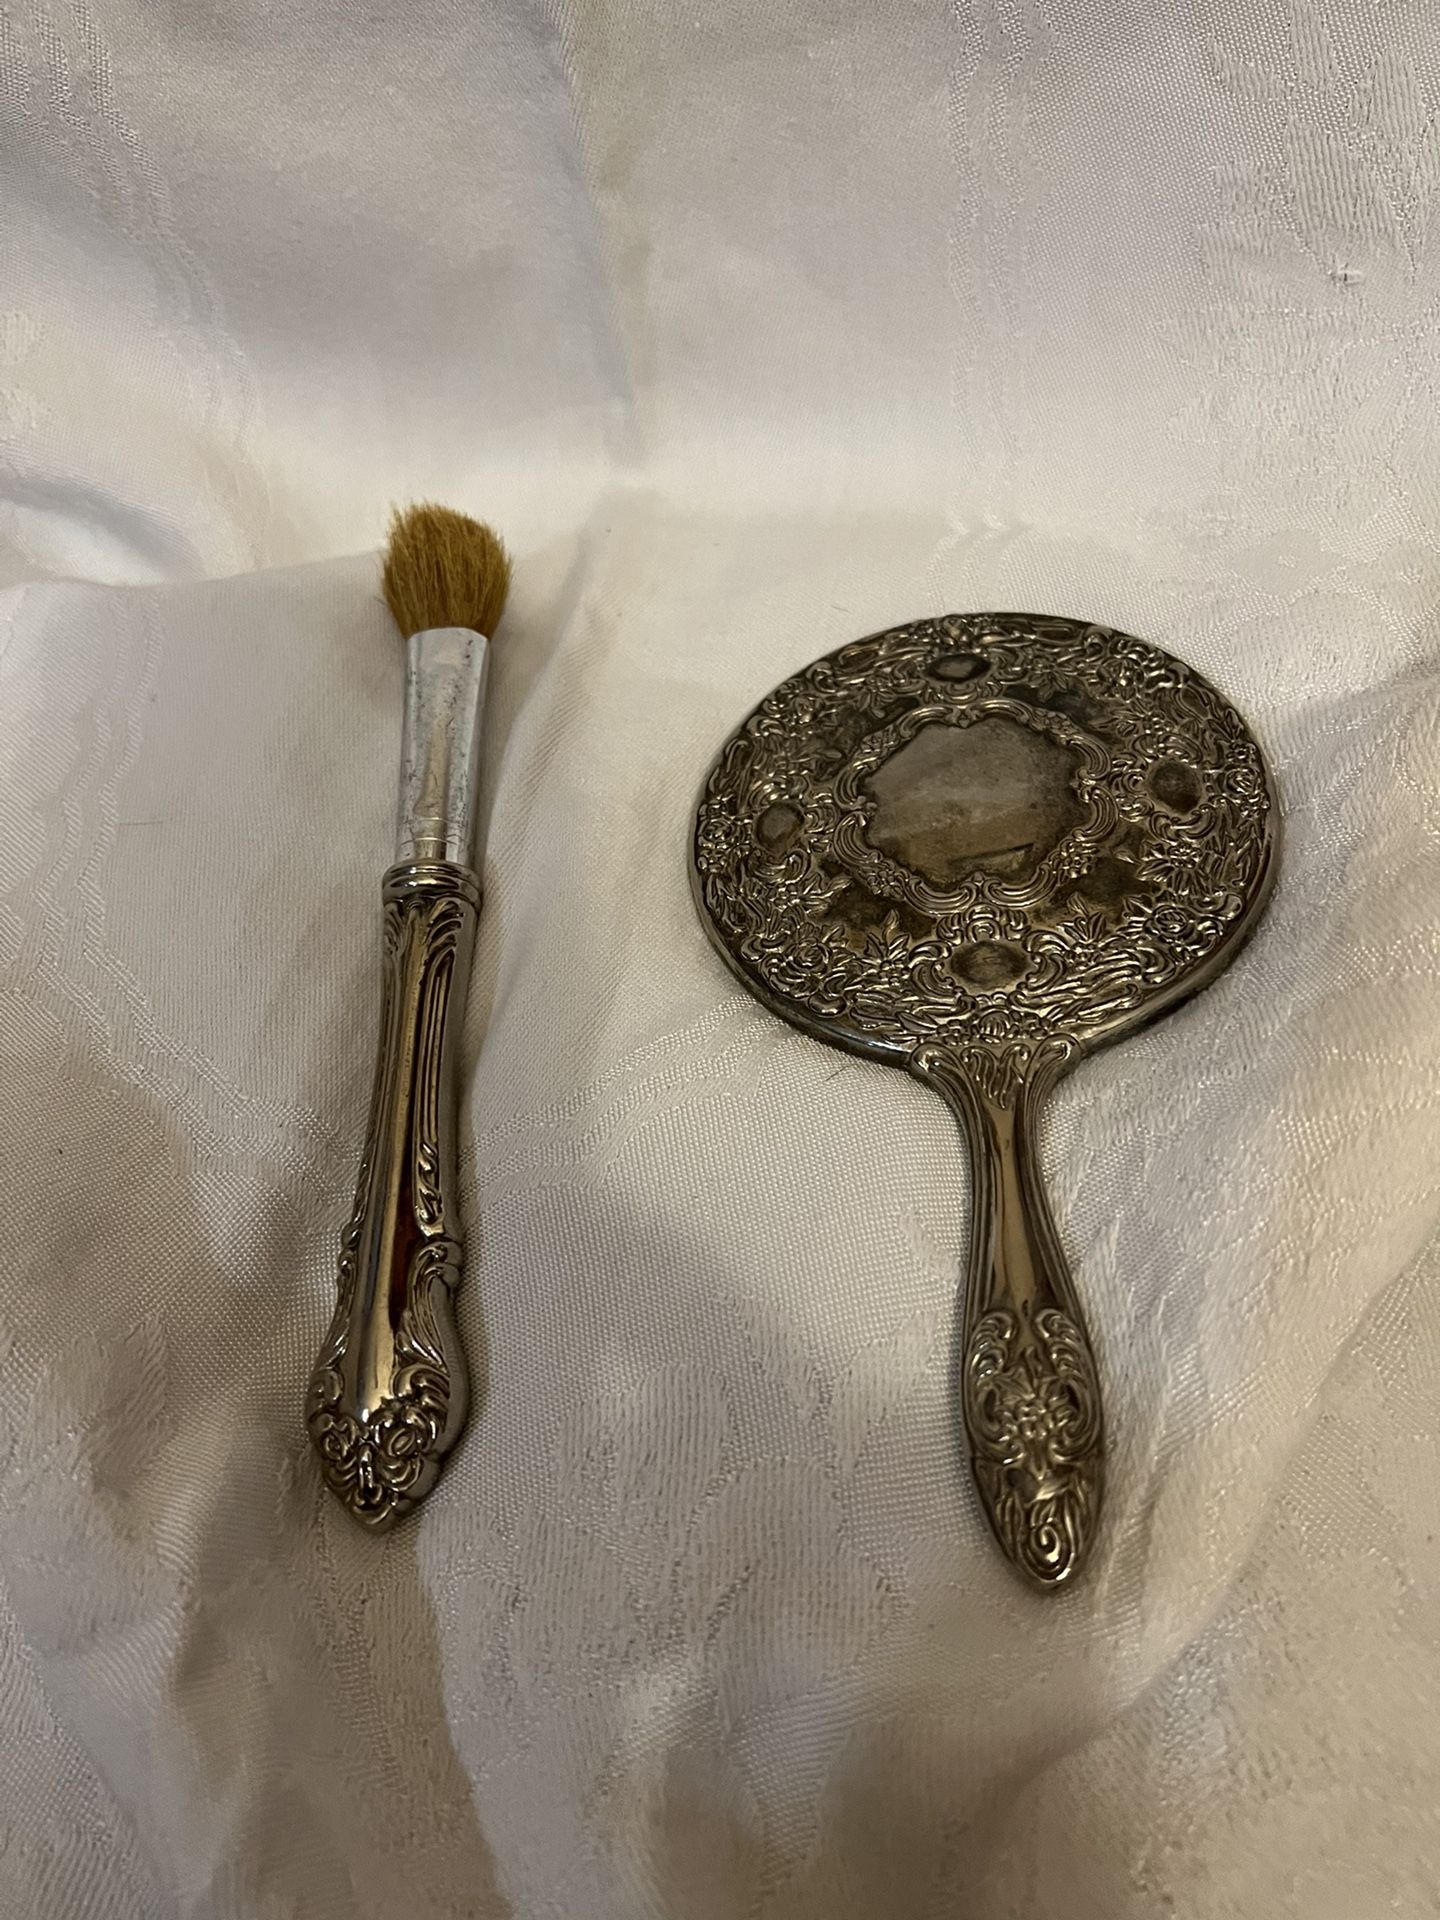 Antique Silver Plated Mirror And Cosmetic Brush